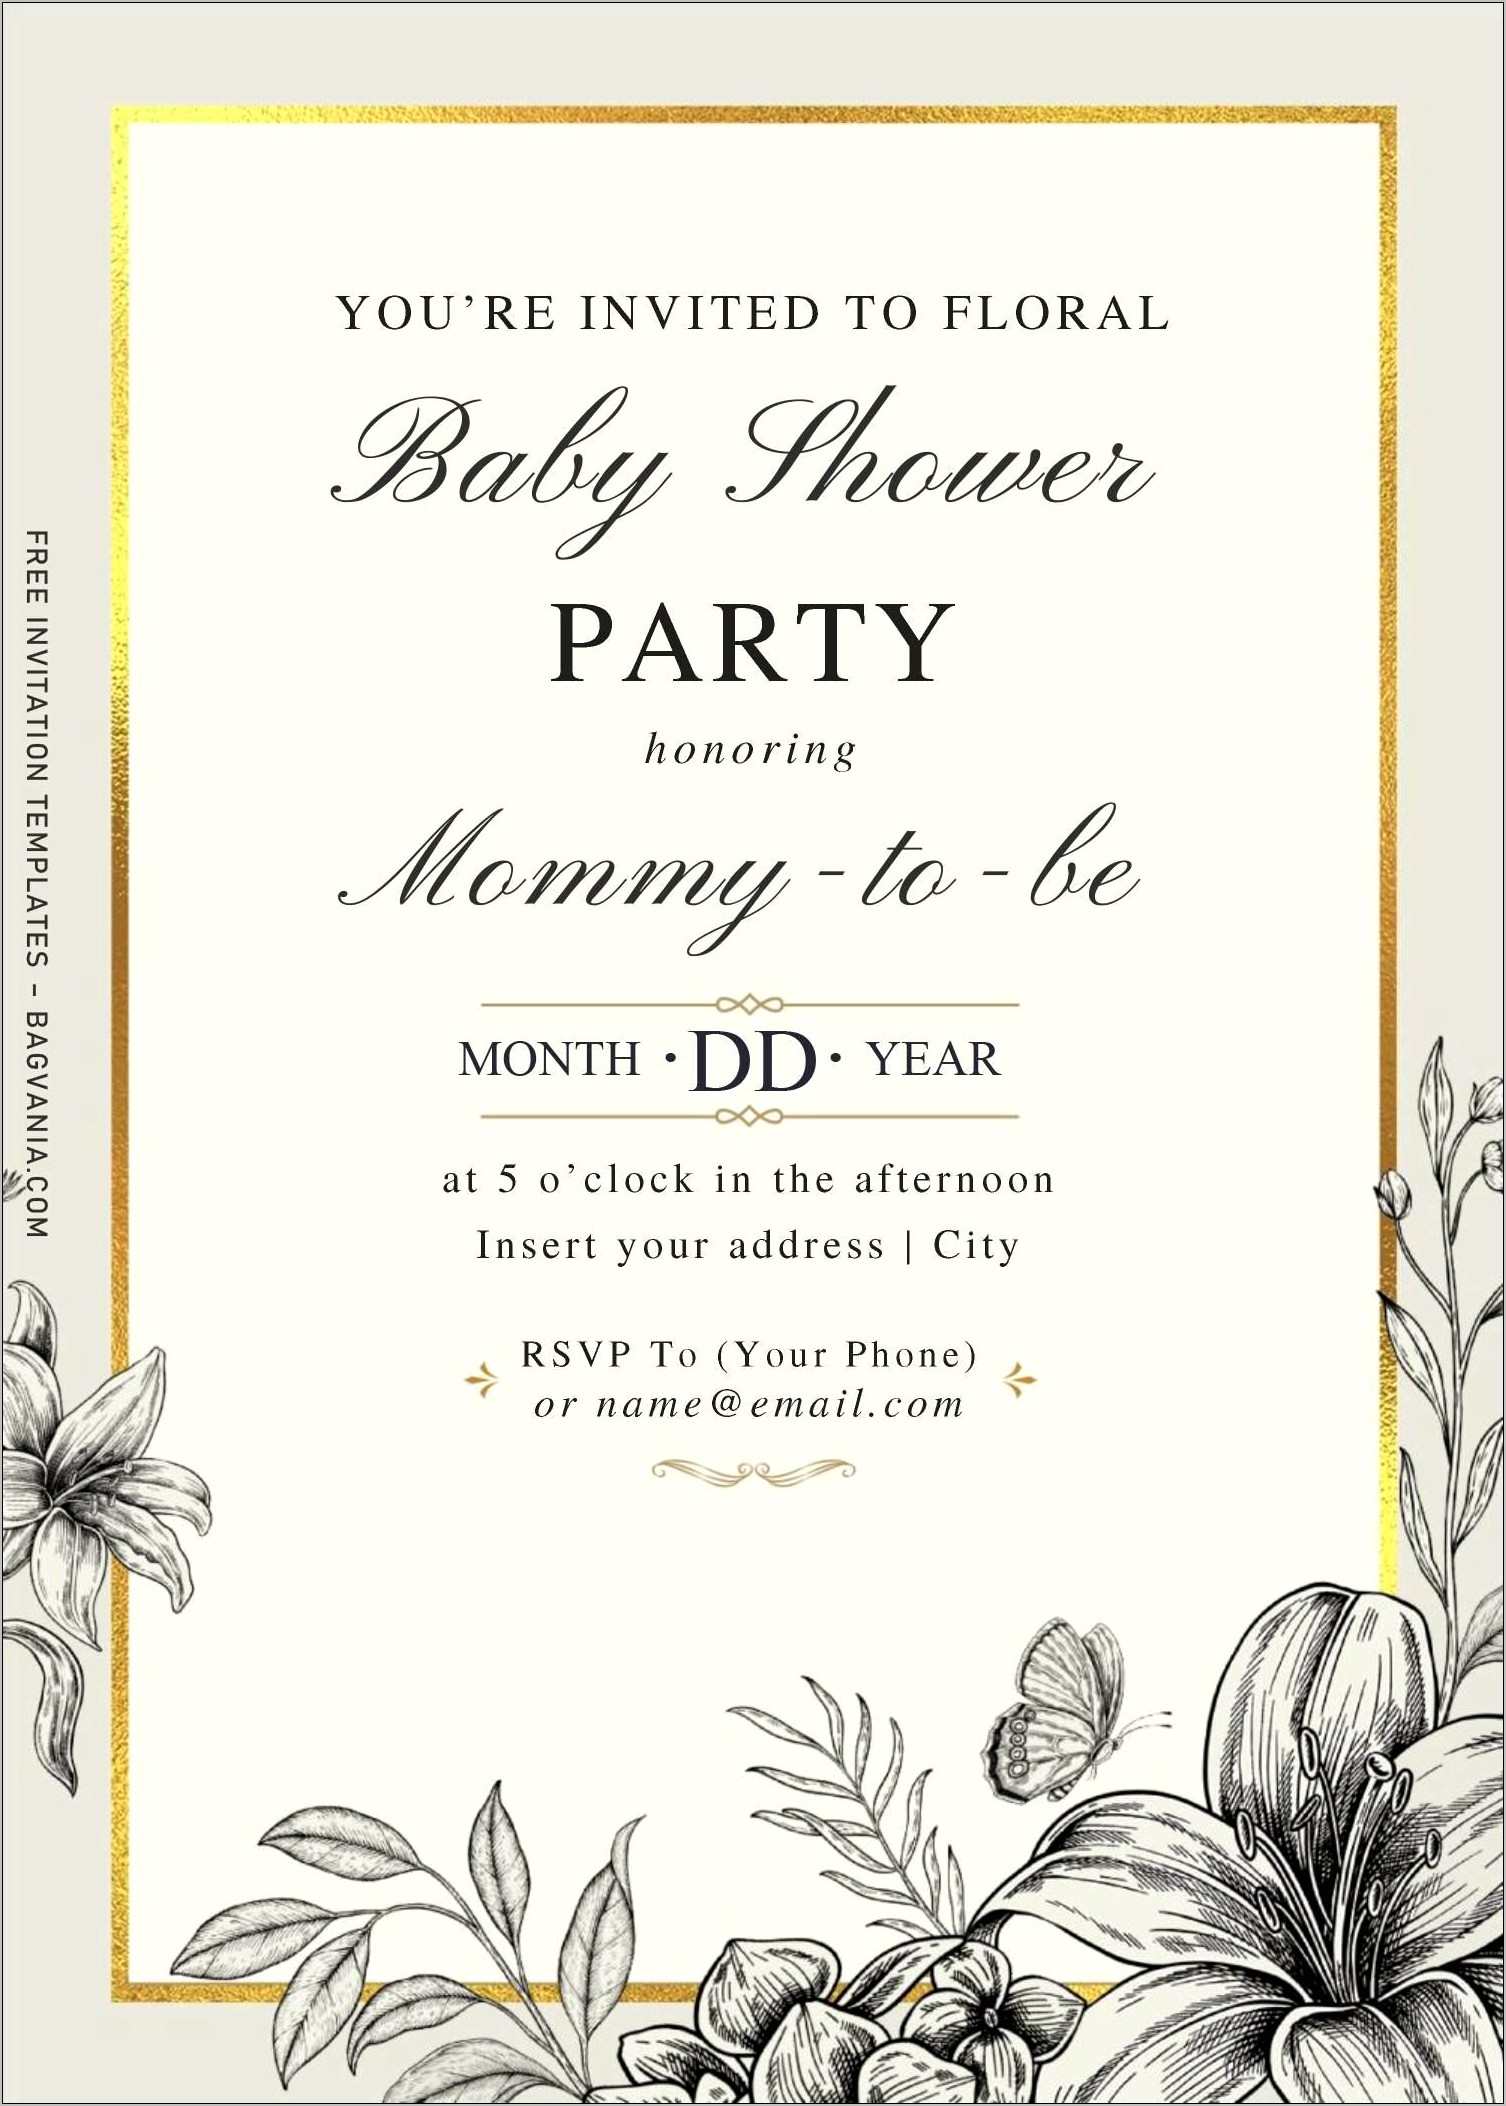  50 s Party Invitation Templates Free Resume Example Gallery